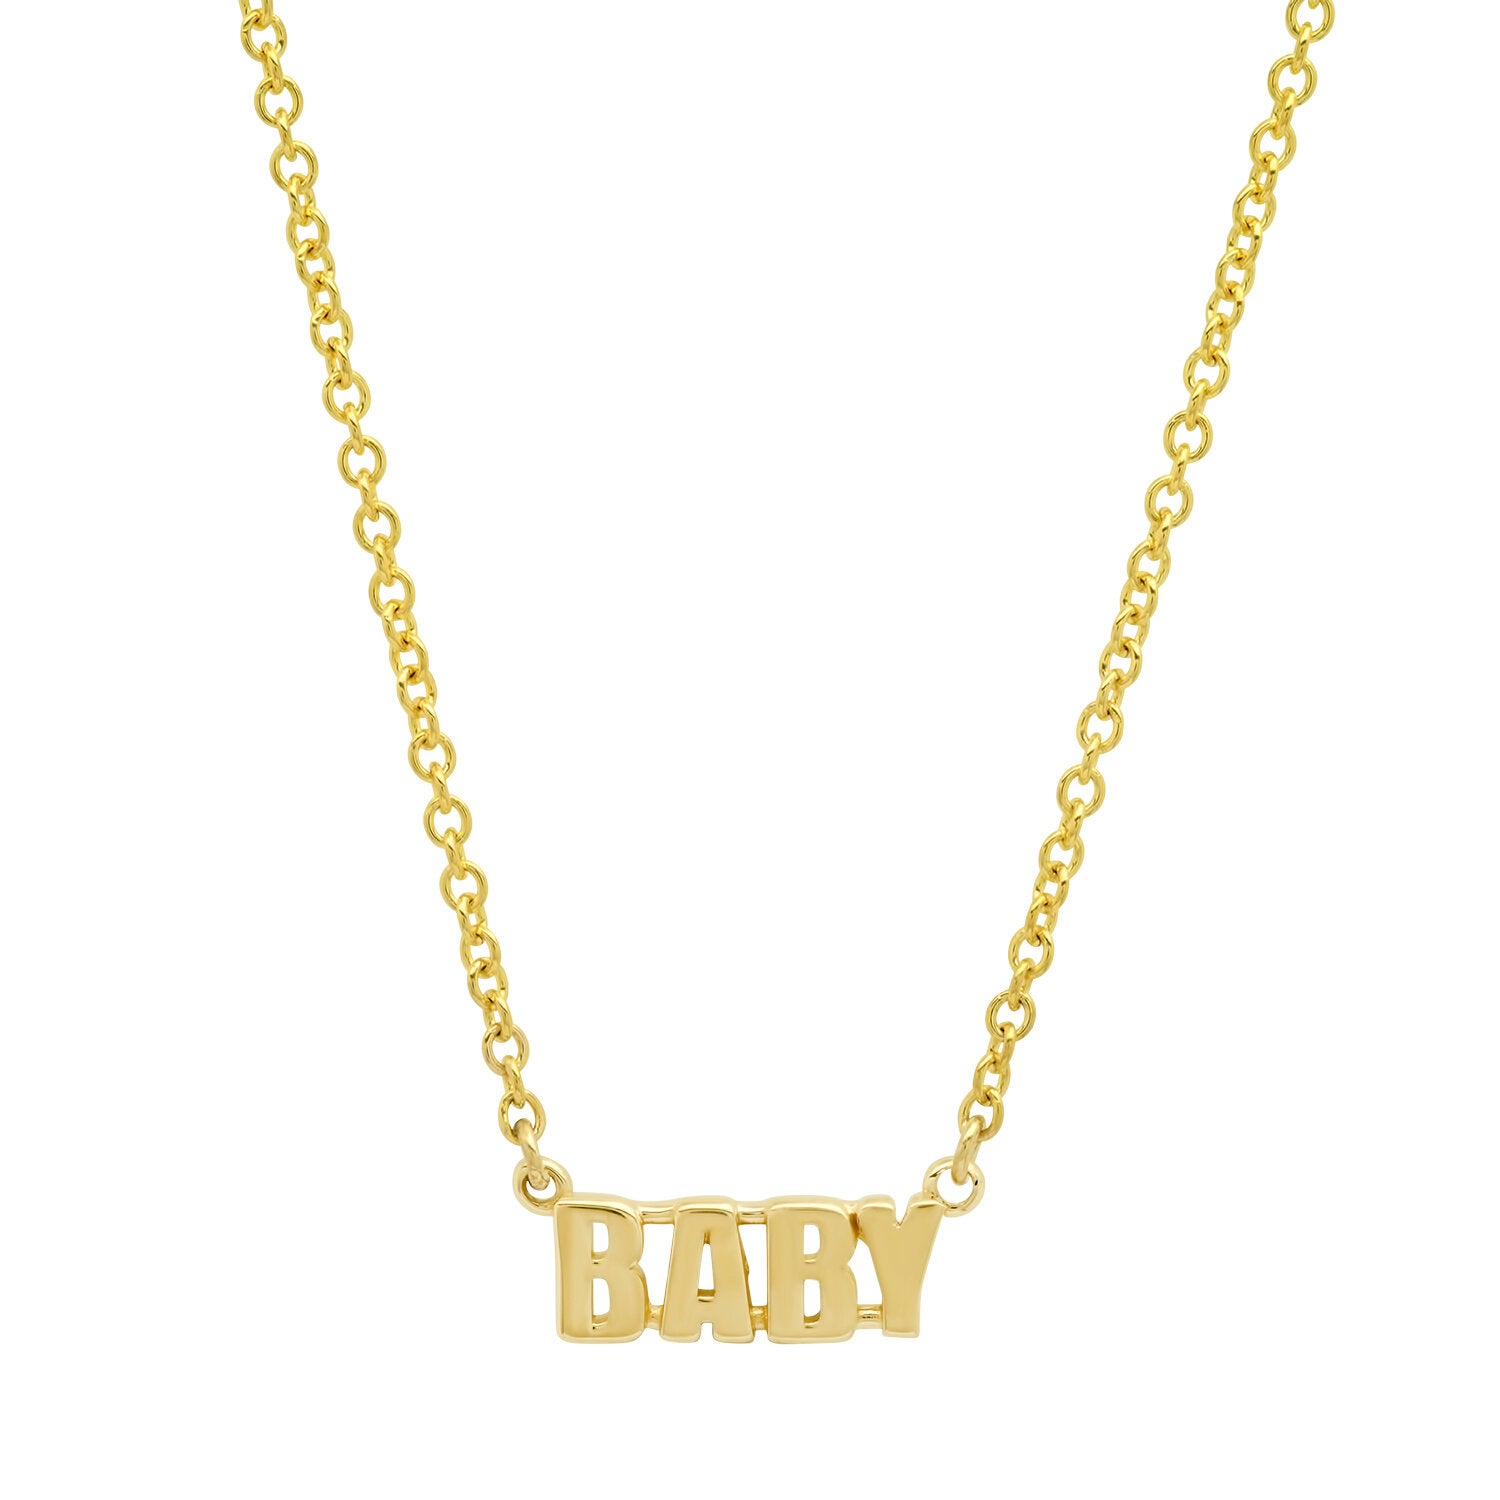 "Baby" Necklace